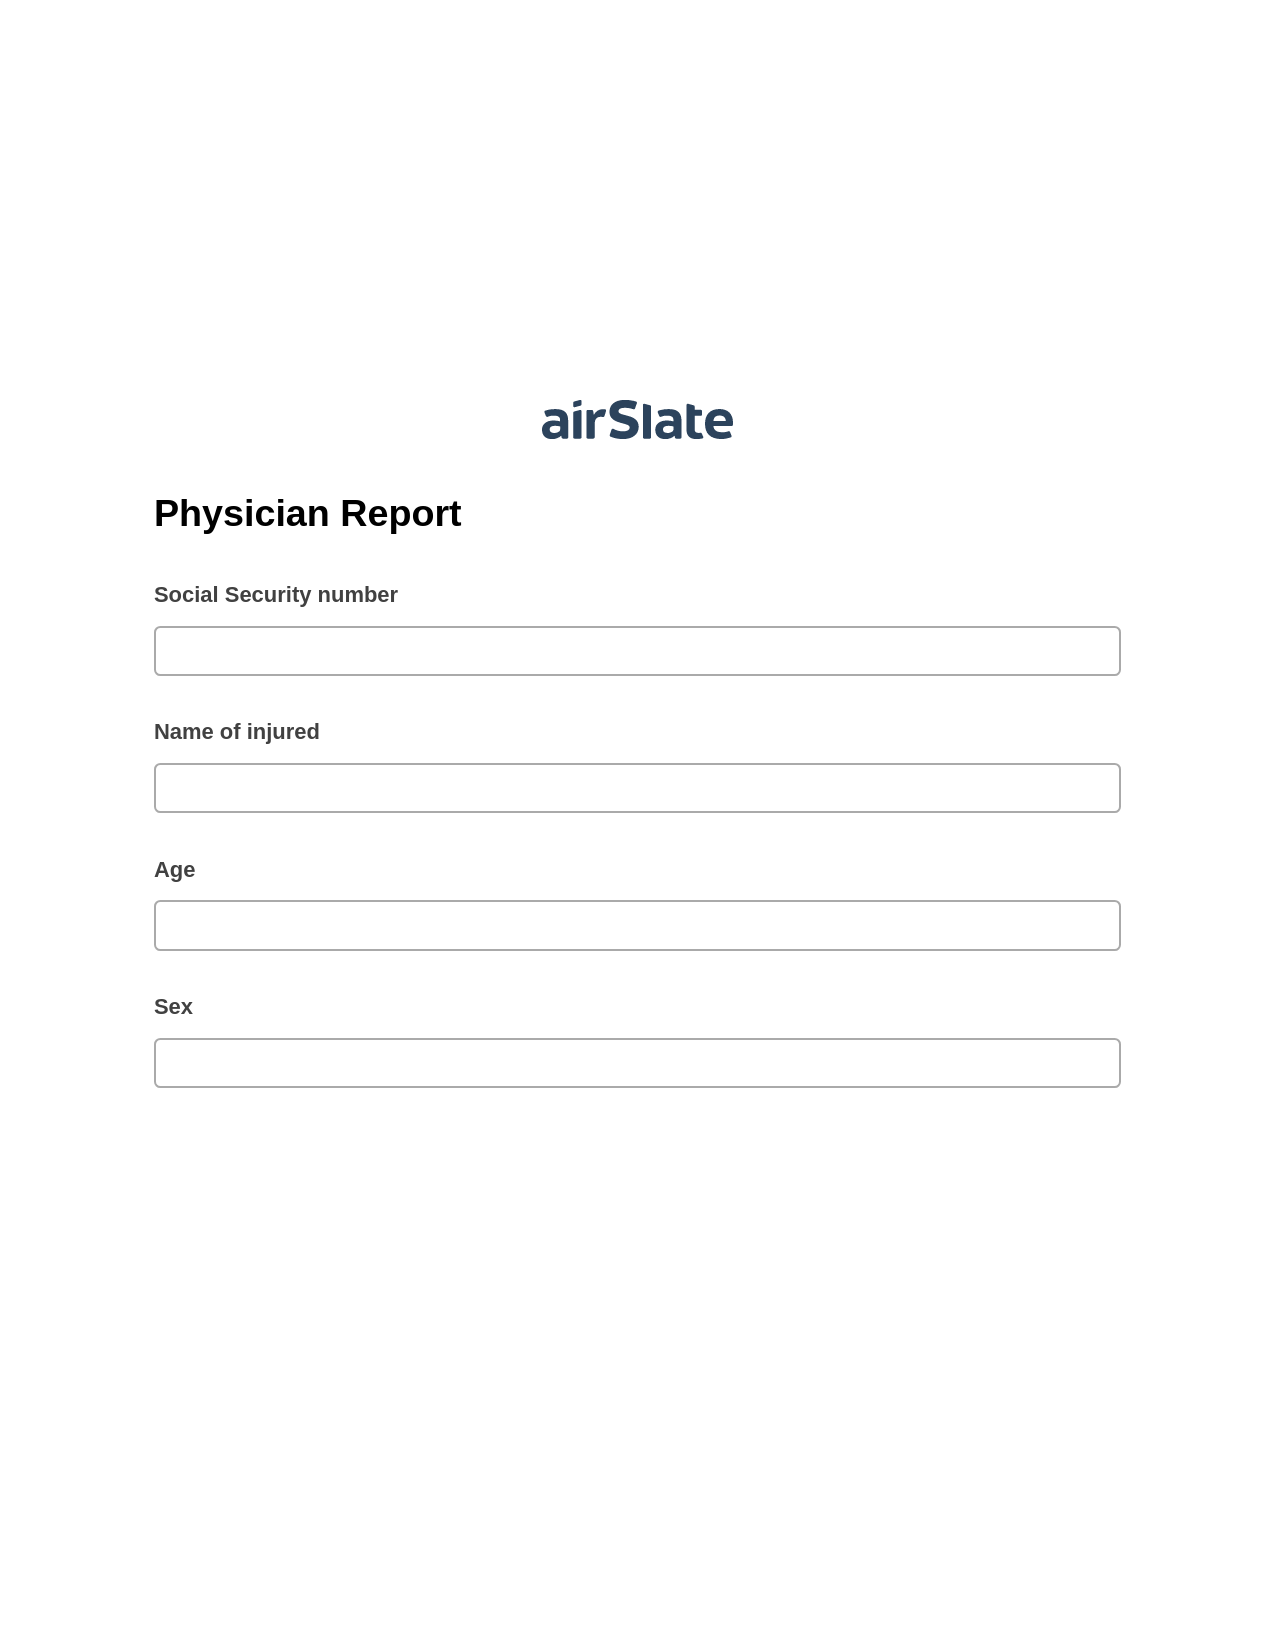 Physician Report Prefill from NetSuite records, Create slate addon, Archive to OneDrive Bot